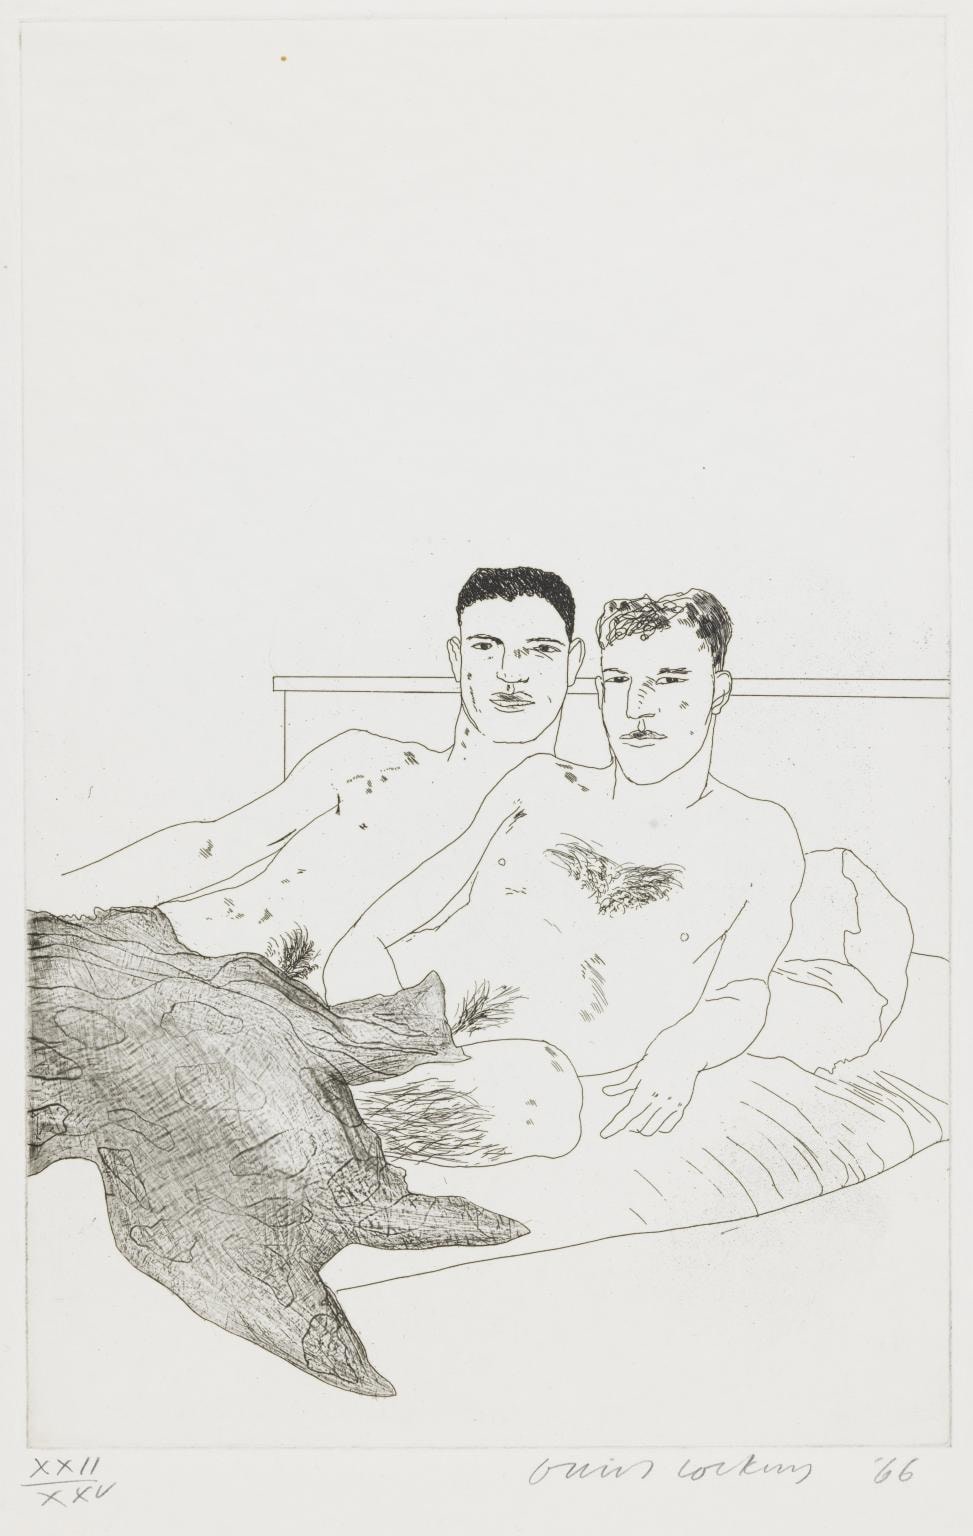 David Hockney, The Beginning, 1966, Etching and aquatint on paper, 13 13/16&quot; &times; 8 7/8&quot; at Anita Rogers Gallery